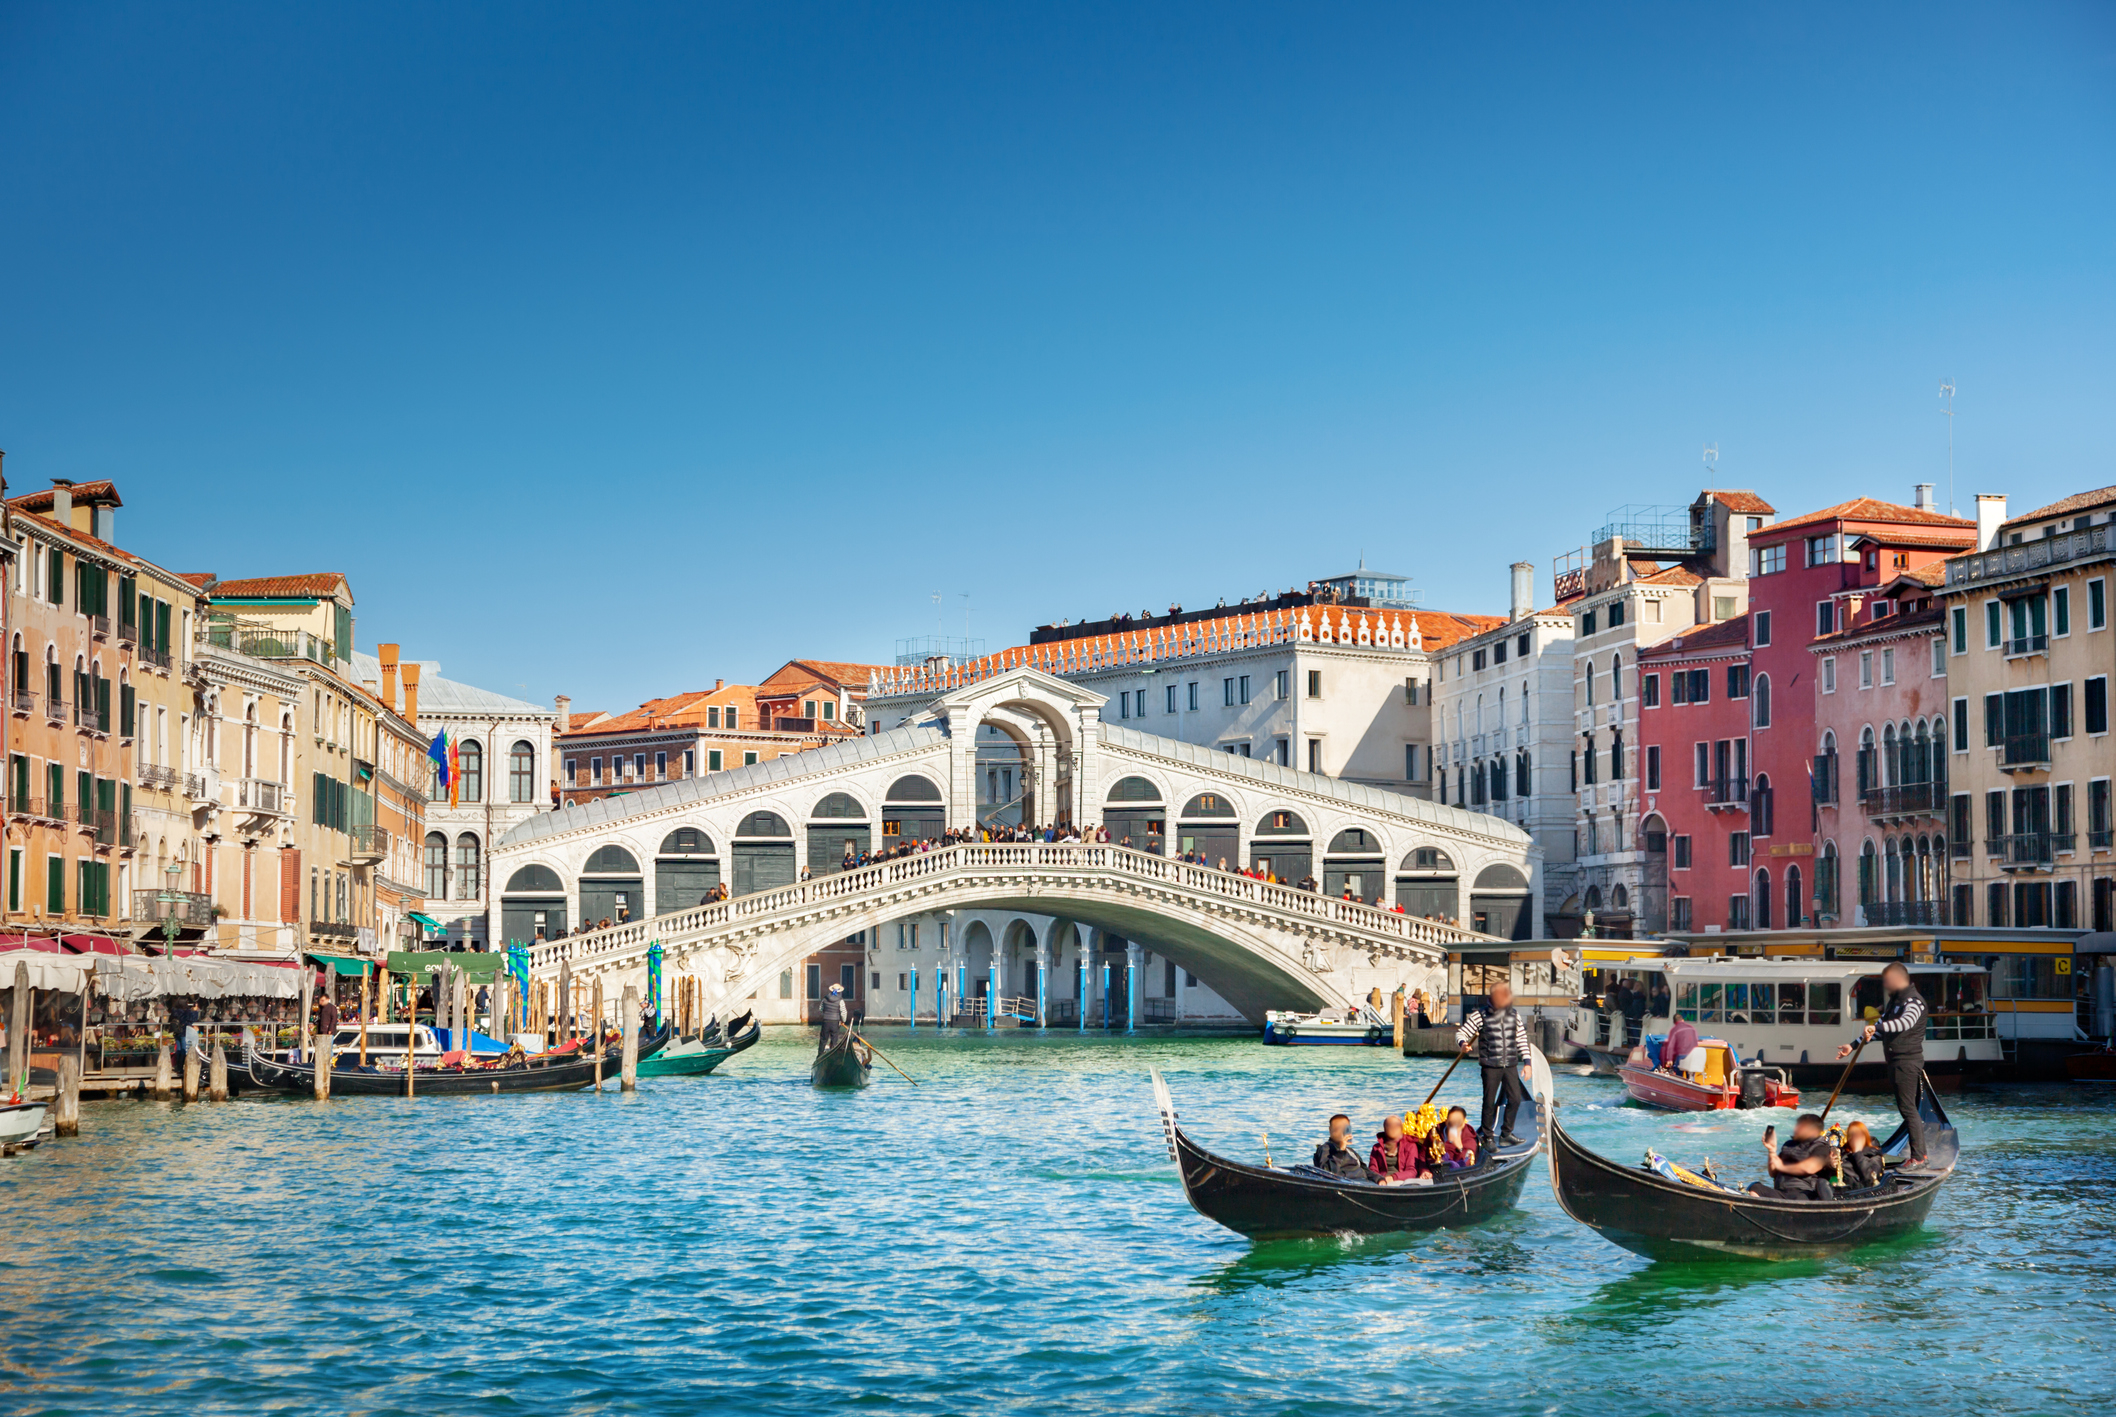 Gondolas on a canal in Venice, with the Rialto Bridge and surrounding buildings in the background